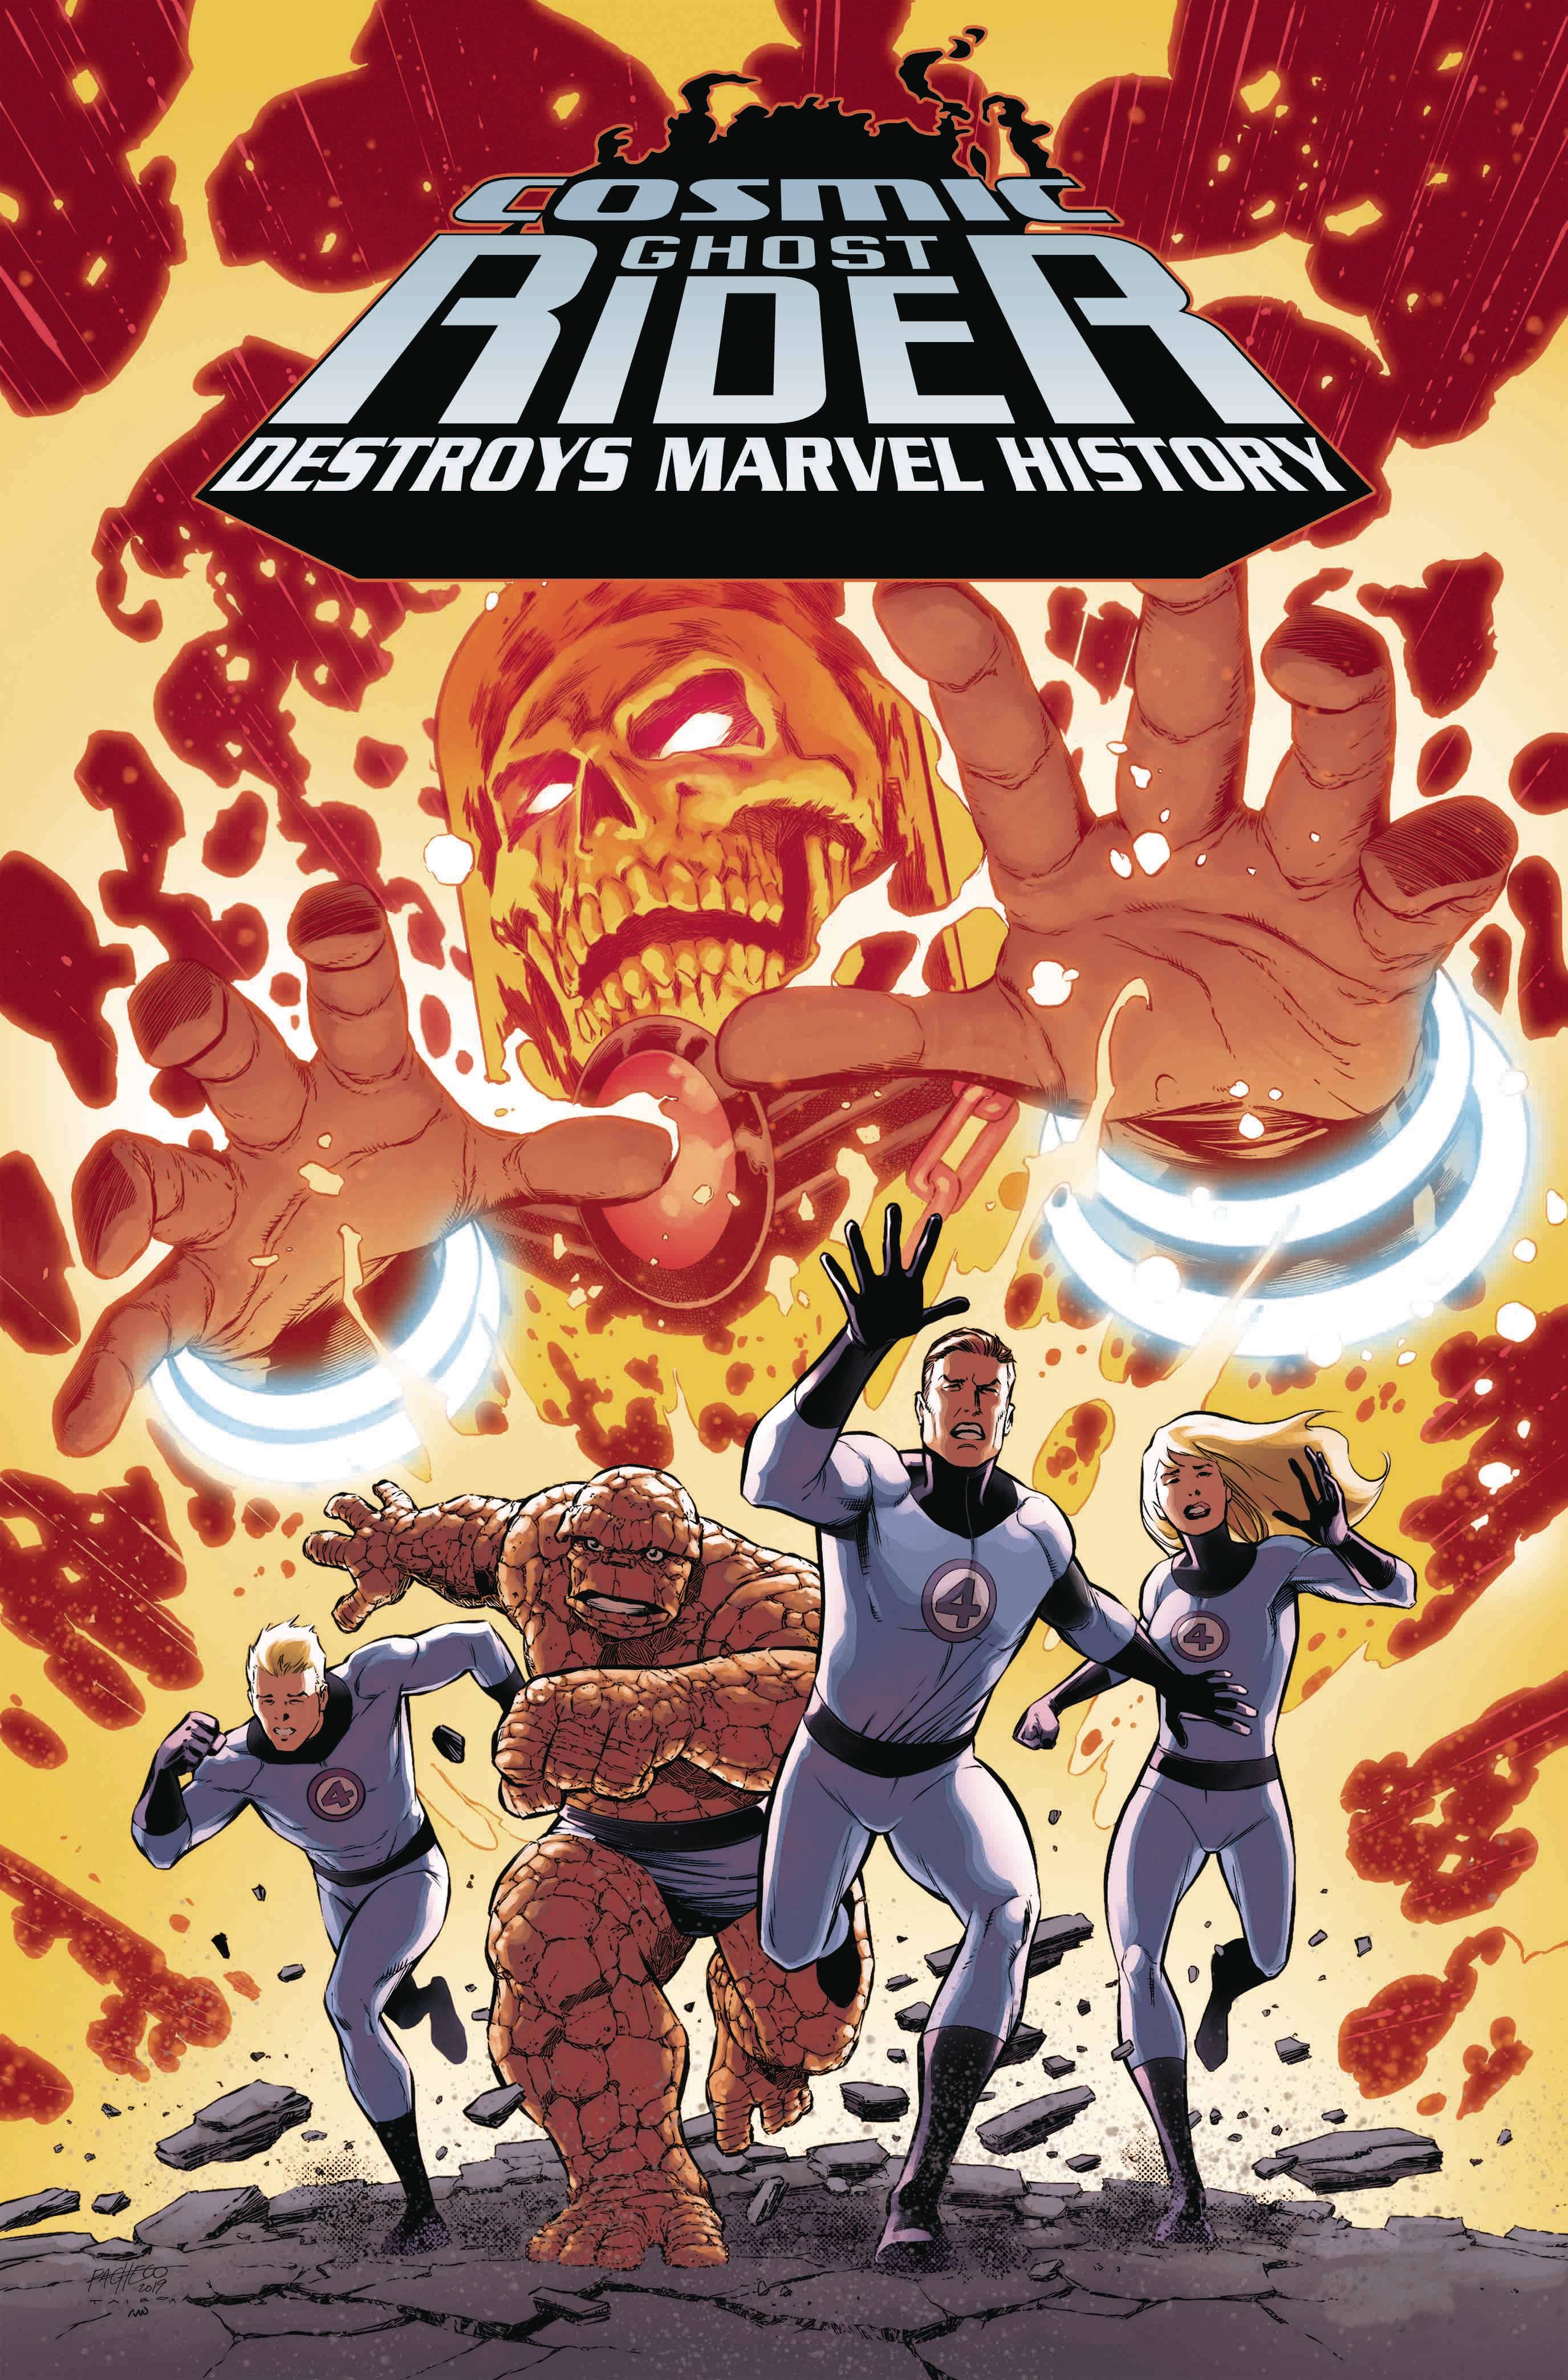 Cosmic Ghost Rider Destroys Marvel History #1 Pacheco Variant (Of 6)